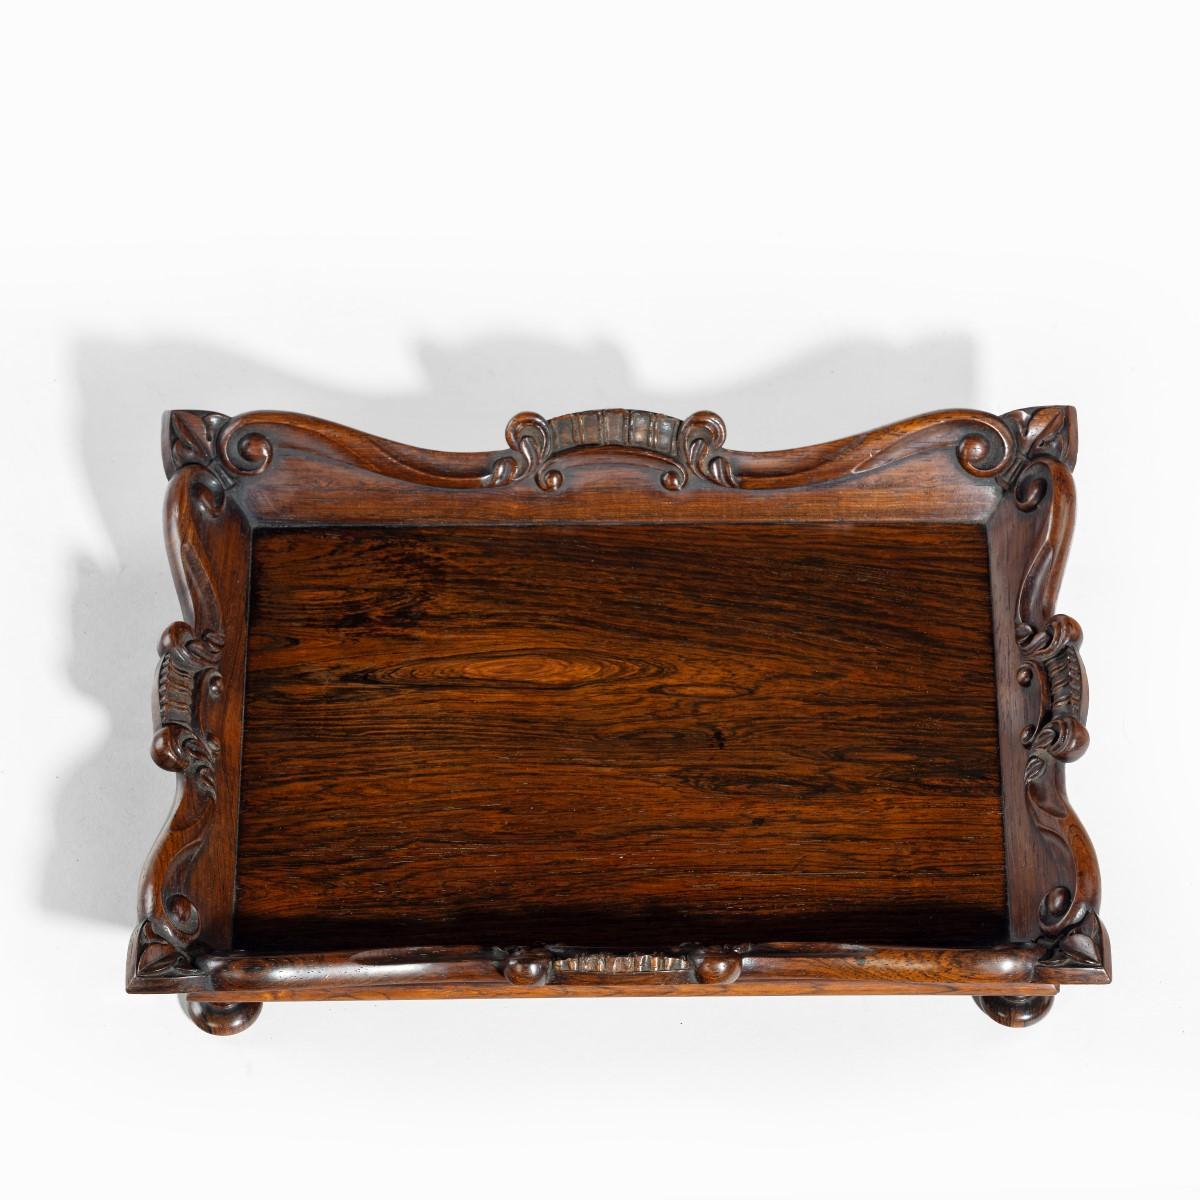 A William IV rosewood desk tidy attributed to Gillows, of rectangular form with everted, bracket sides carved with S-scrolls and pointed trefoil corners, raised on four turned feet.  English, circa 1830.

